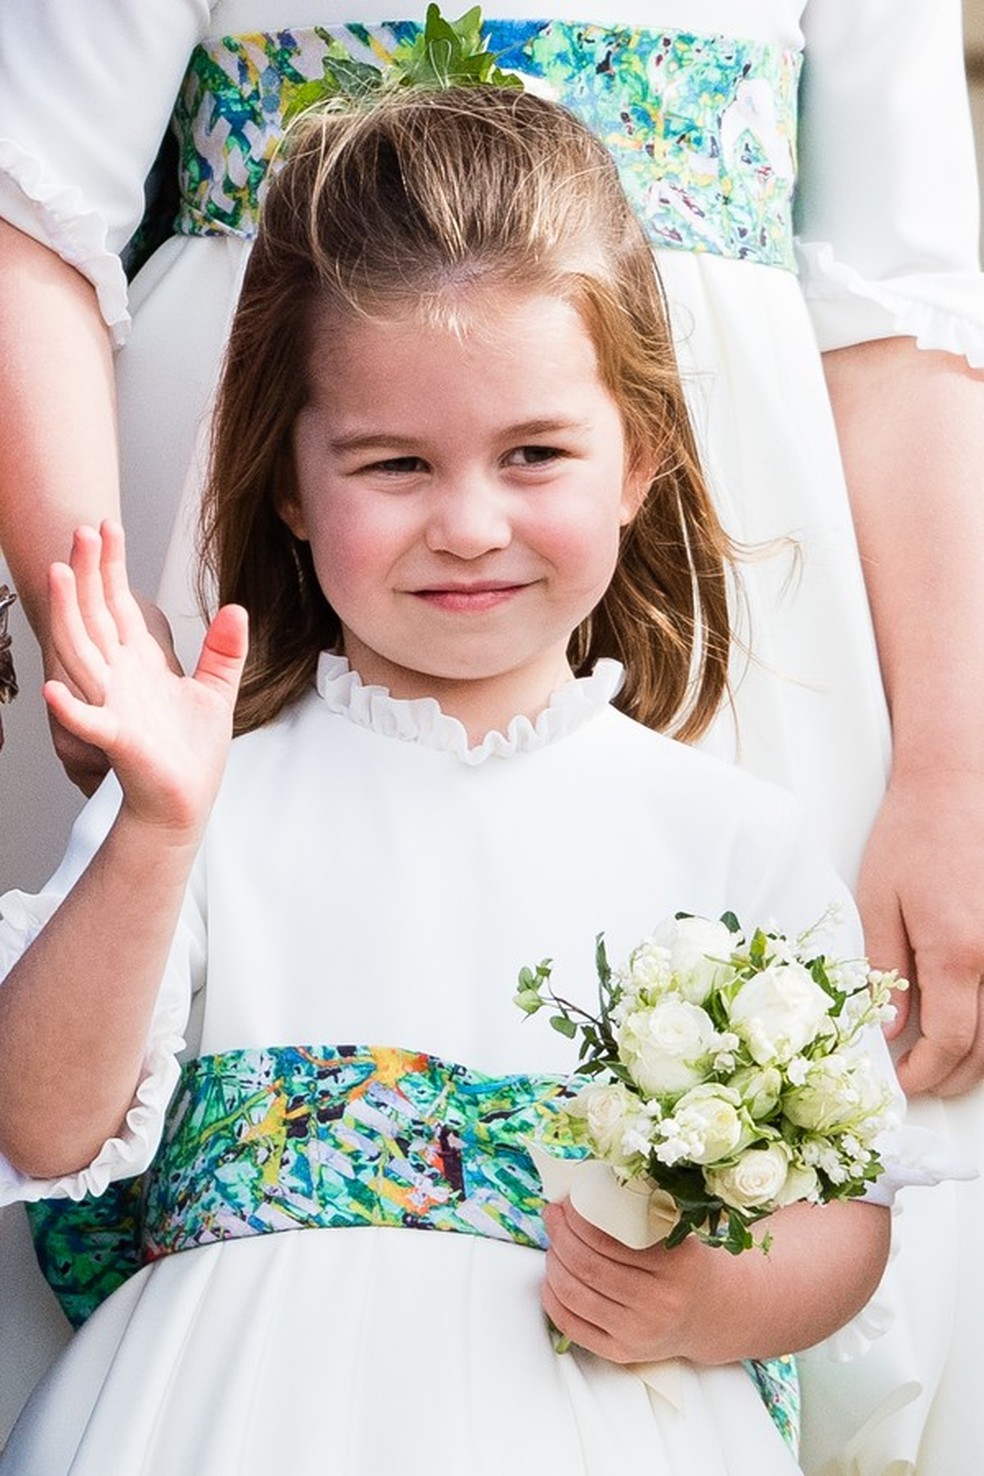 WINDSOR, ENGLAND - OCTOBER 12:  Princess Charlotte of Cambridge attends the wedding of Princess Eugenie of York and Jack Brooksbank at St George's Chapel in Windsor Castle on October 12, 2018 in Windsor, England.  (Photo by Pool/Samir Hussein/WireImage) (Foto: WireImage) — Foto: Glamour